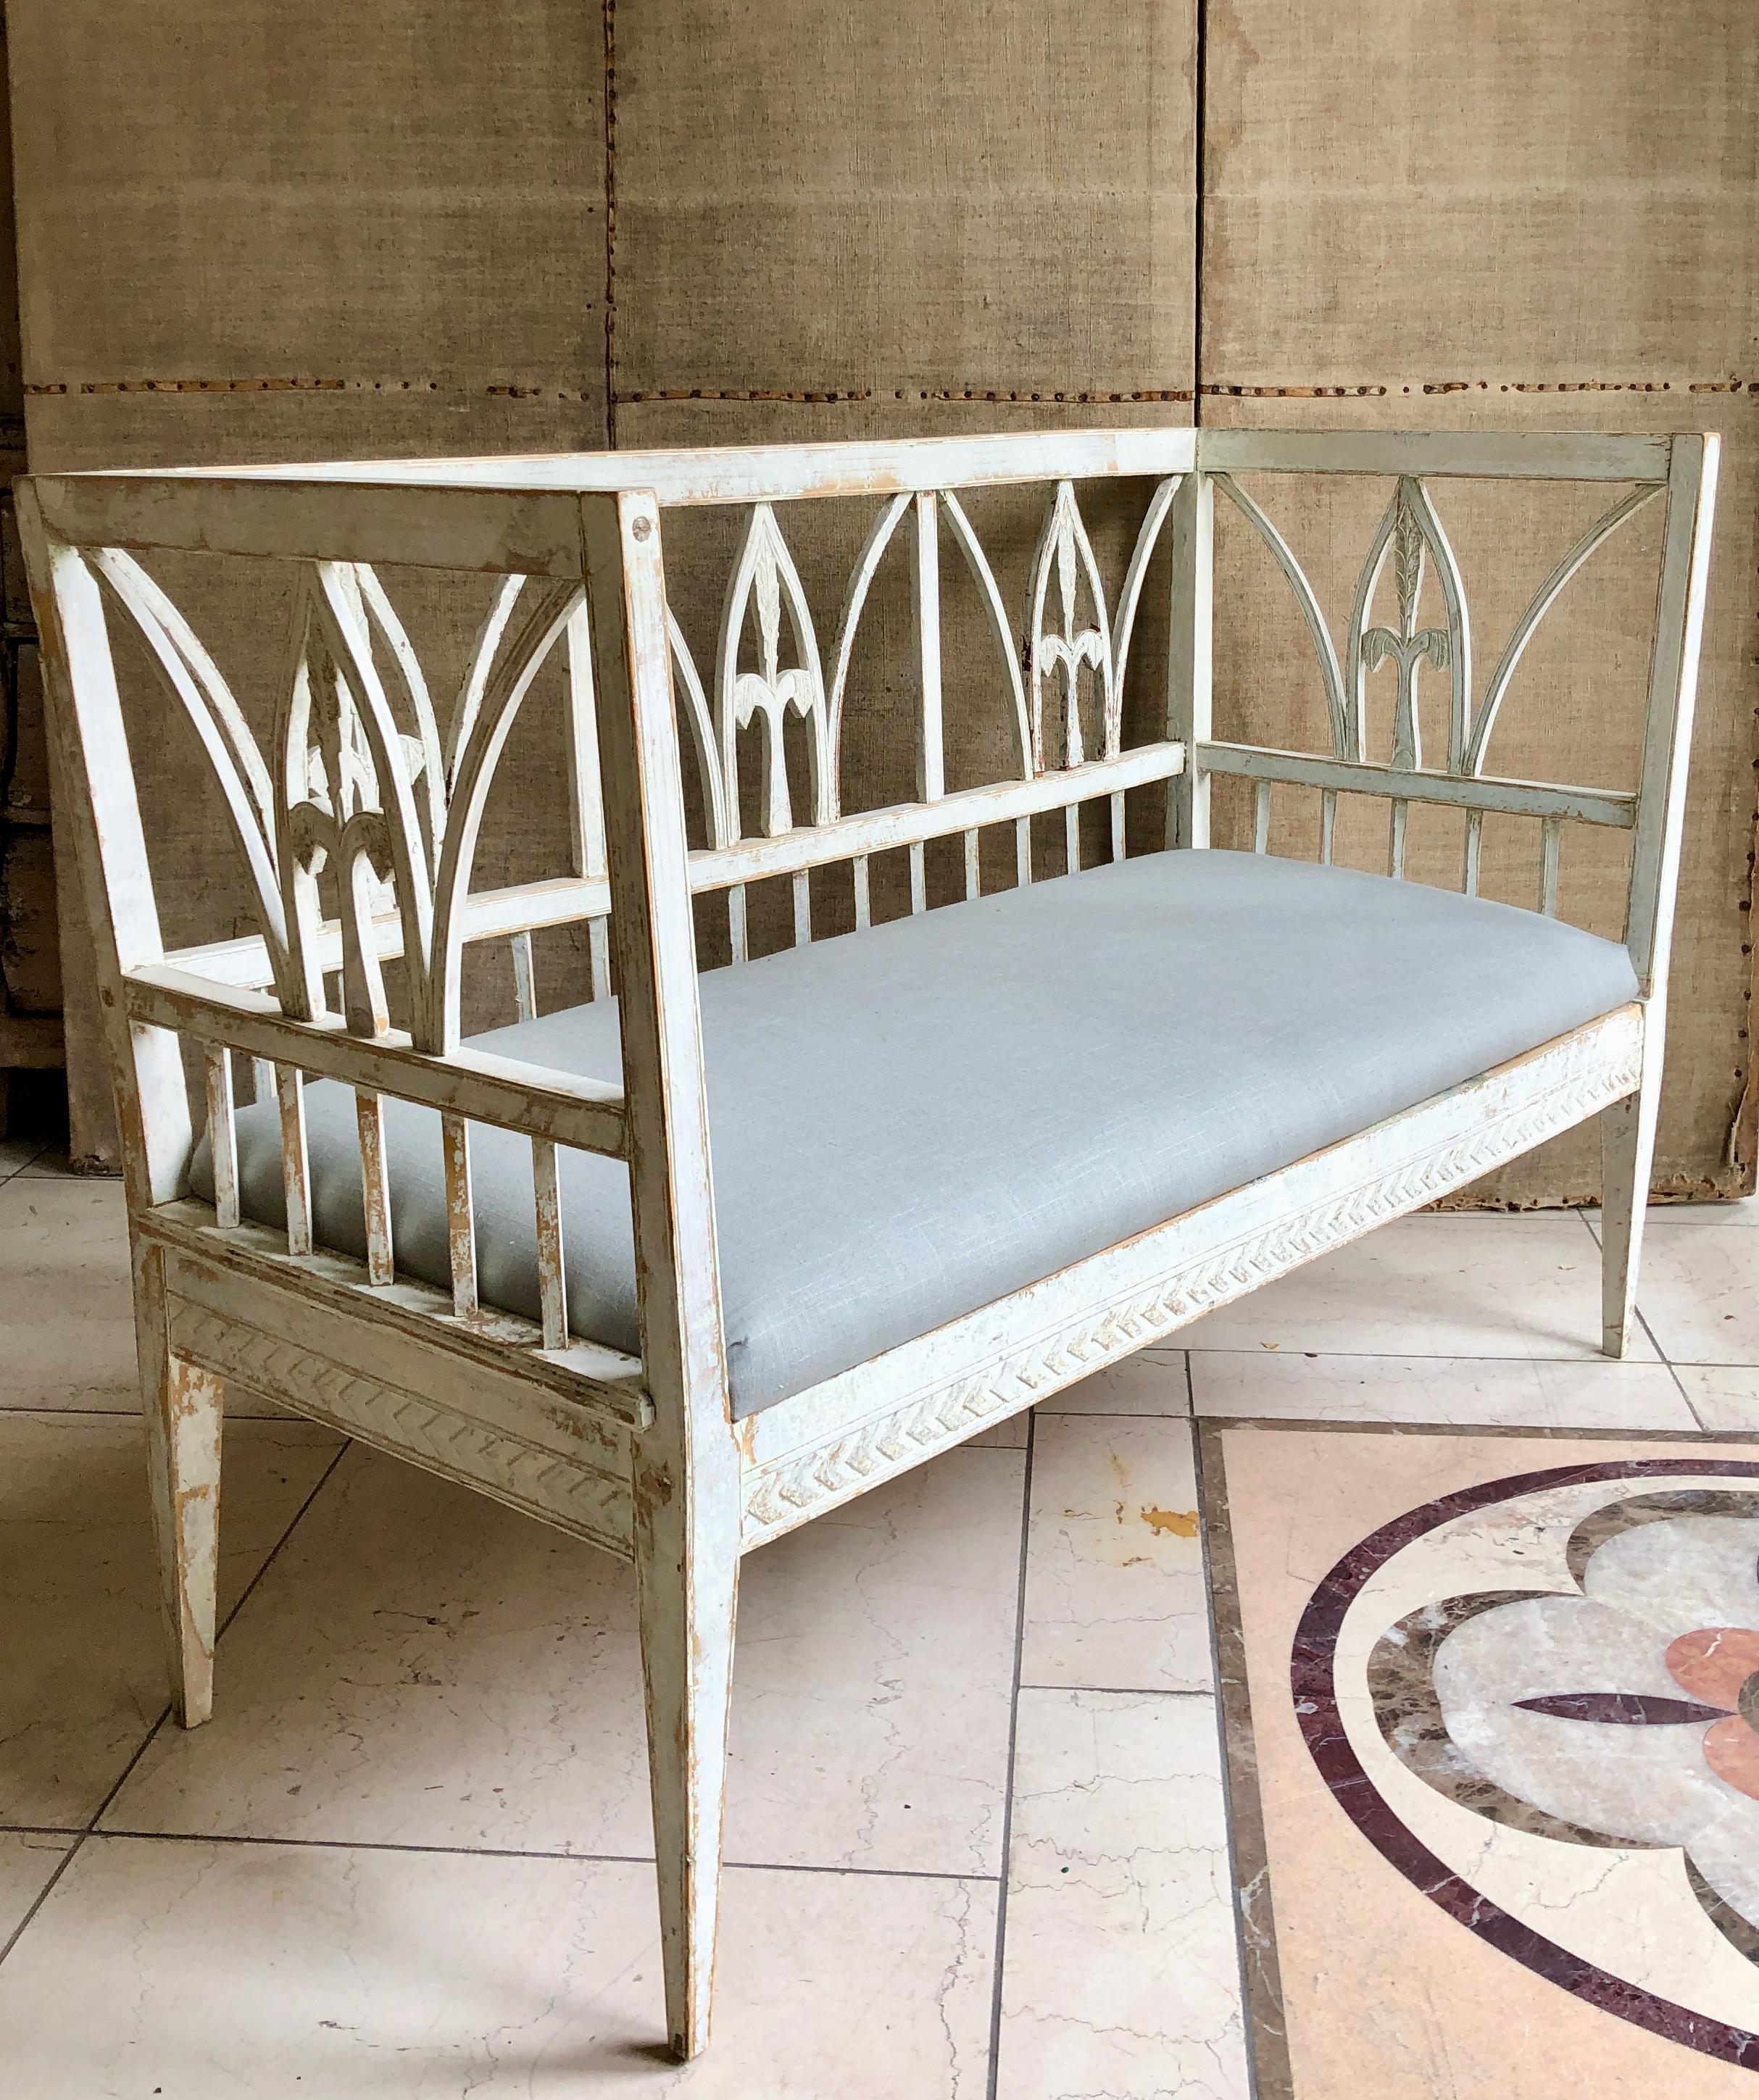 Charming Gustavian style small sofa settee, Sweden, circa 1880 with the beautiful openwork back with or lightest pale grey patina. Sofa seat upholstered in linen.
Seat size: 21